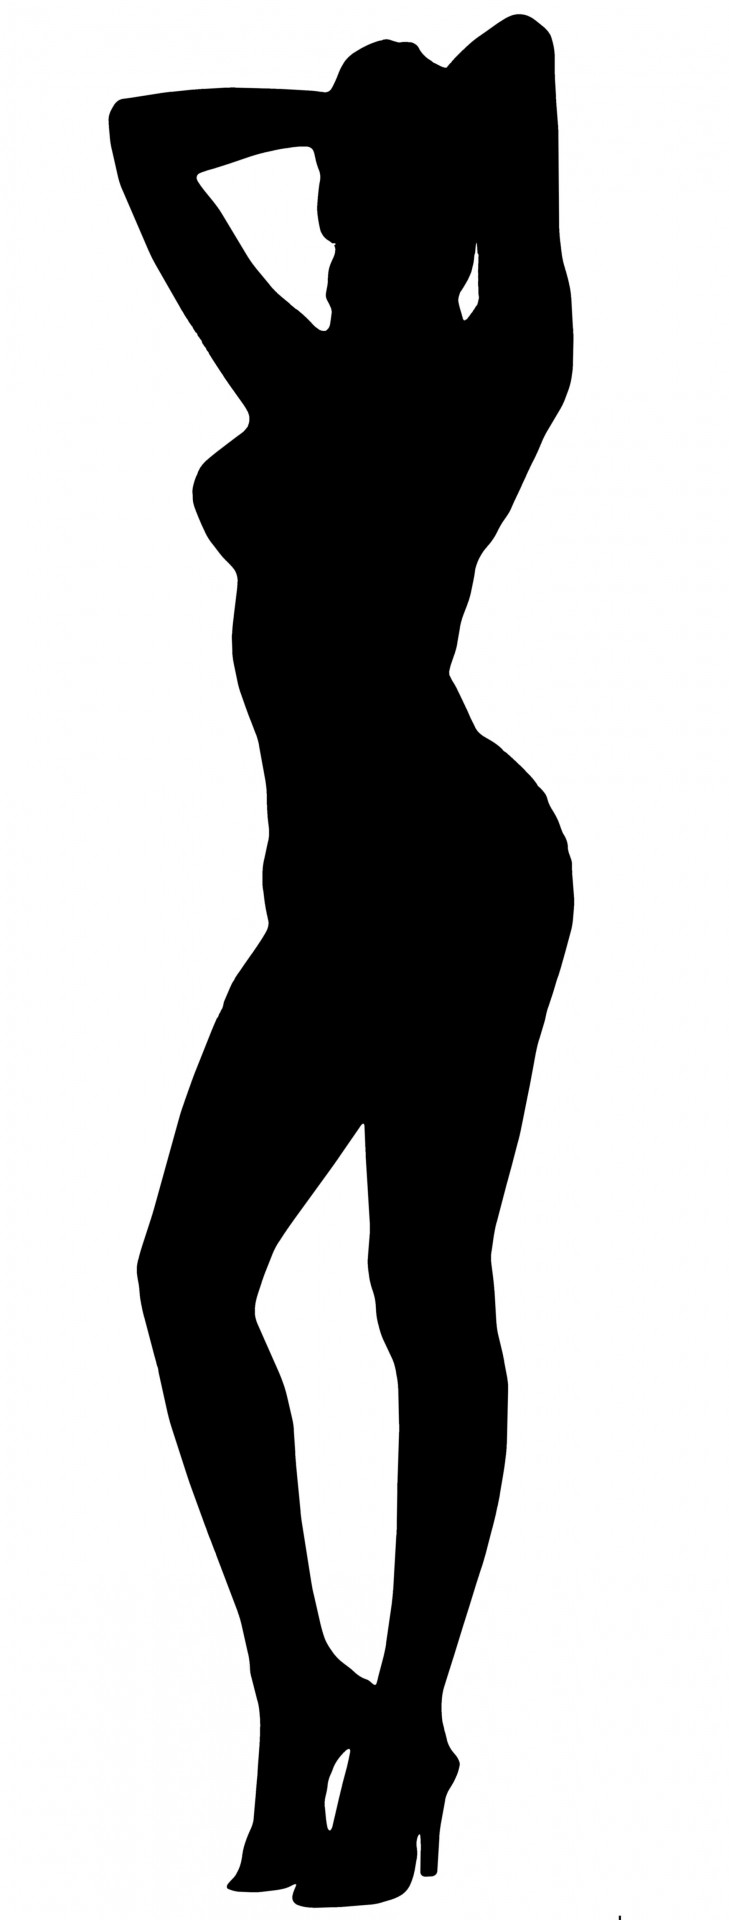 Silhouette Woman 7 Free Stock Photo - Public Domain Pictures